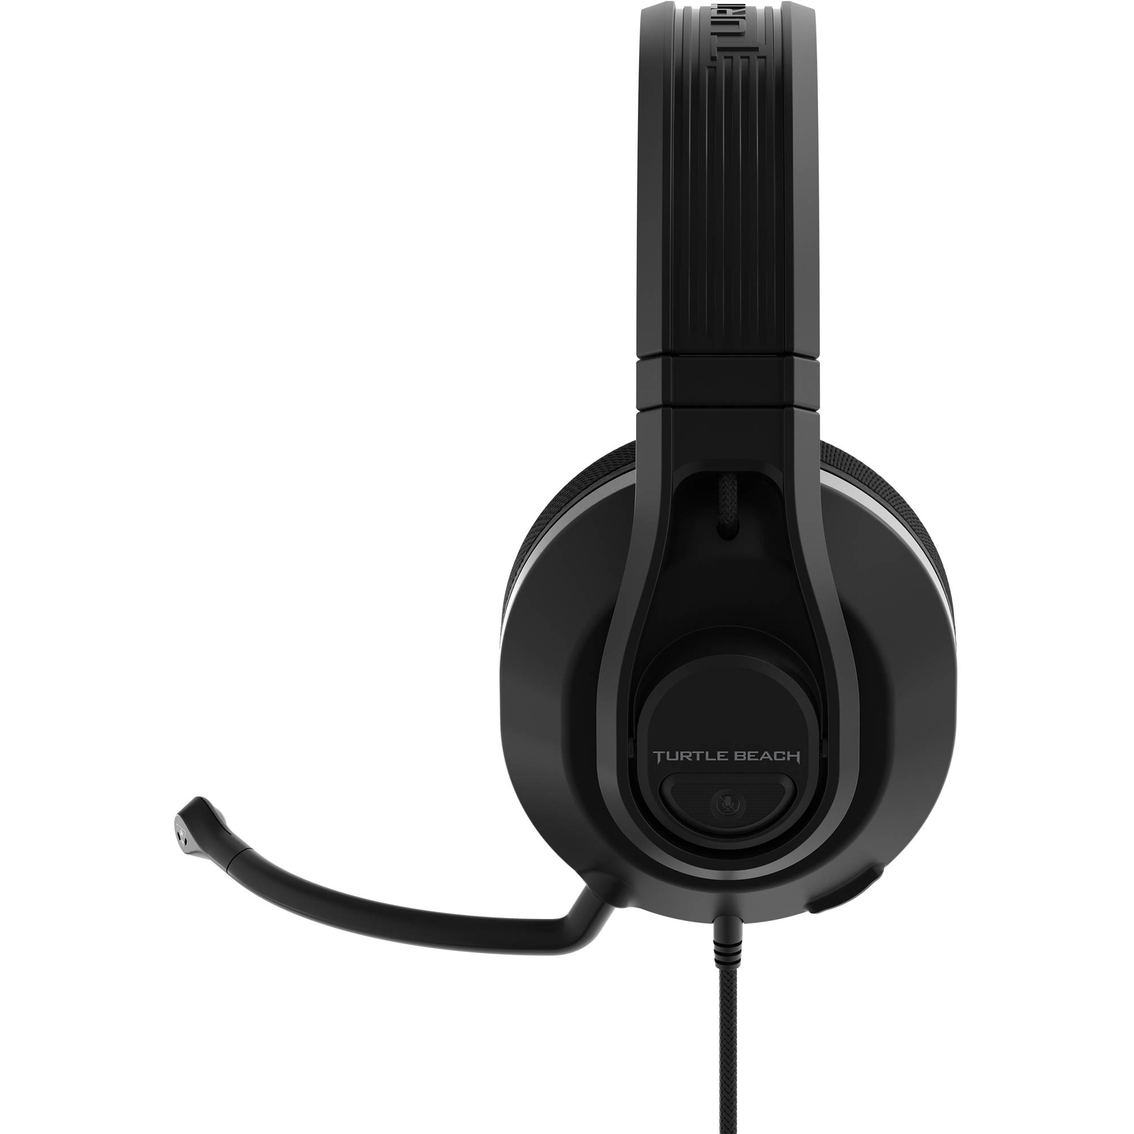 Turtle Beach Recon 500 Gaming Headset - Image 3 of 5